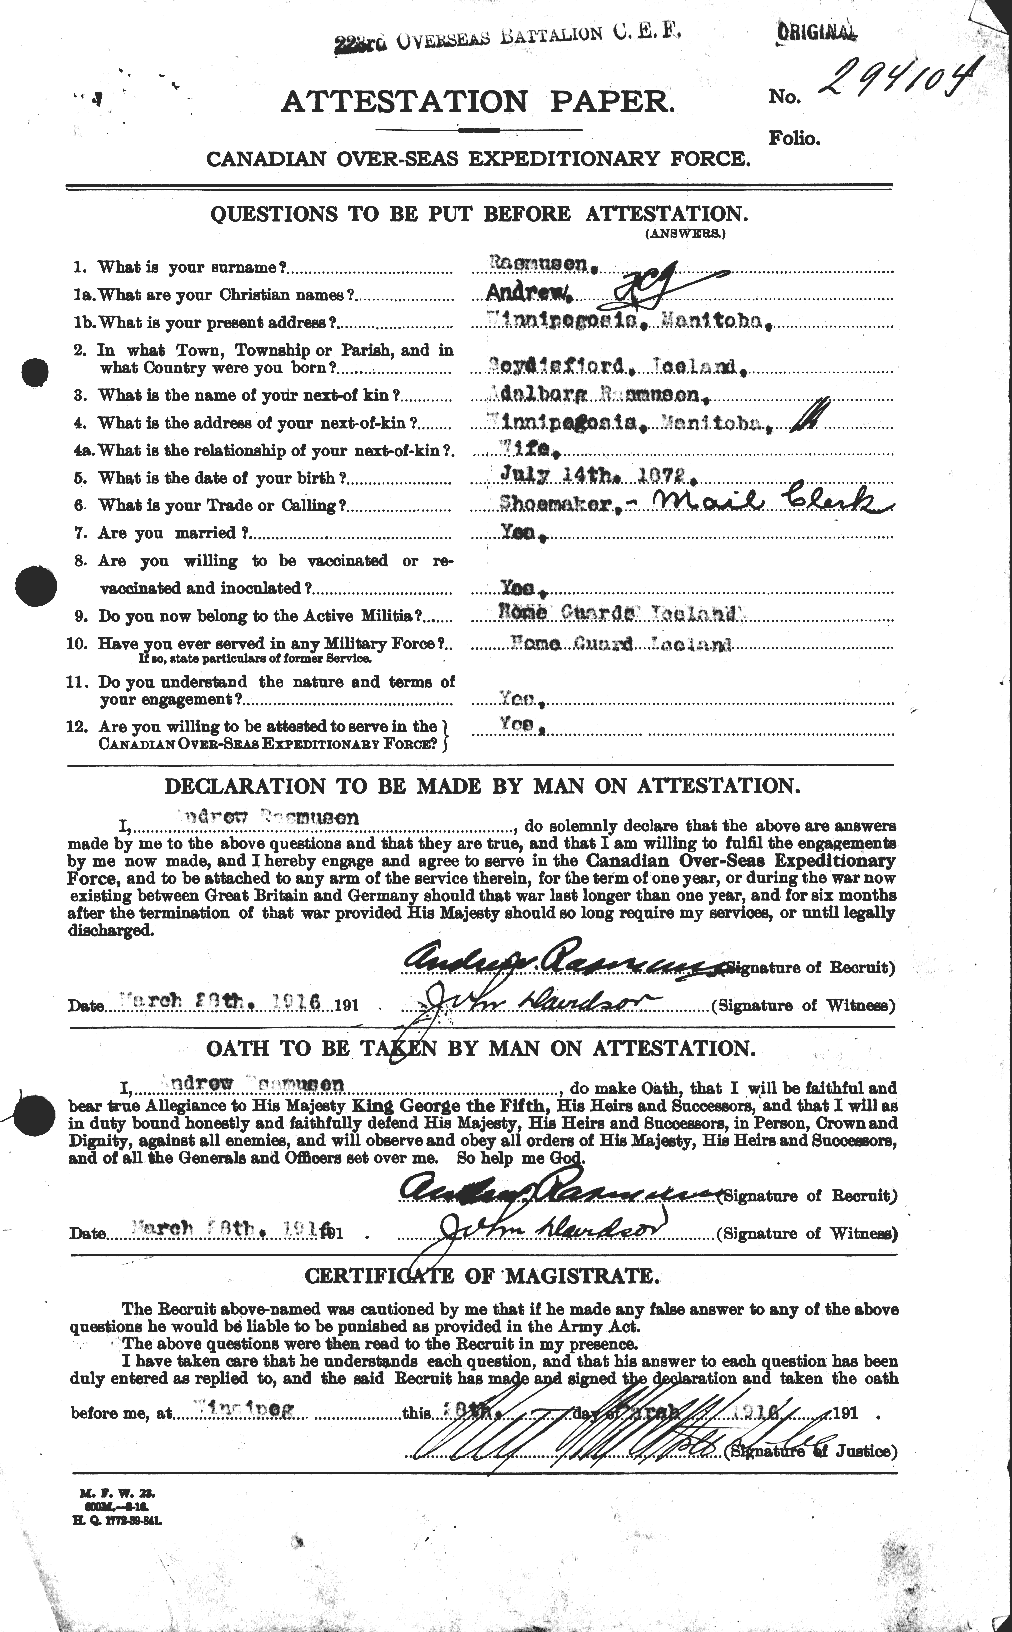 Personnel Records of the First World War - CEF 595043a